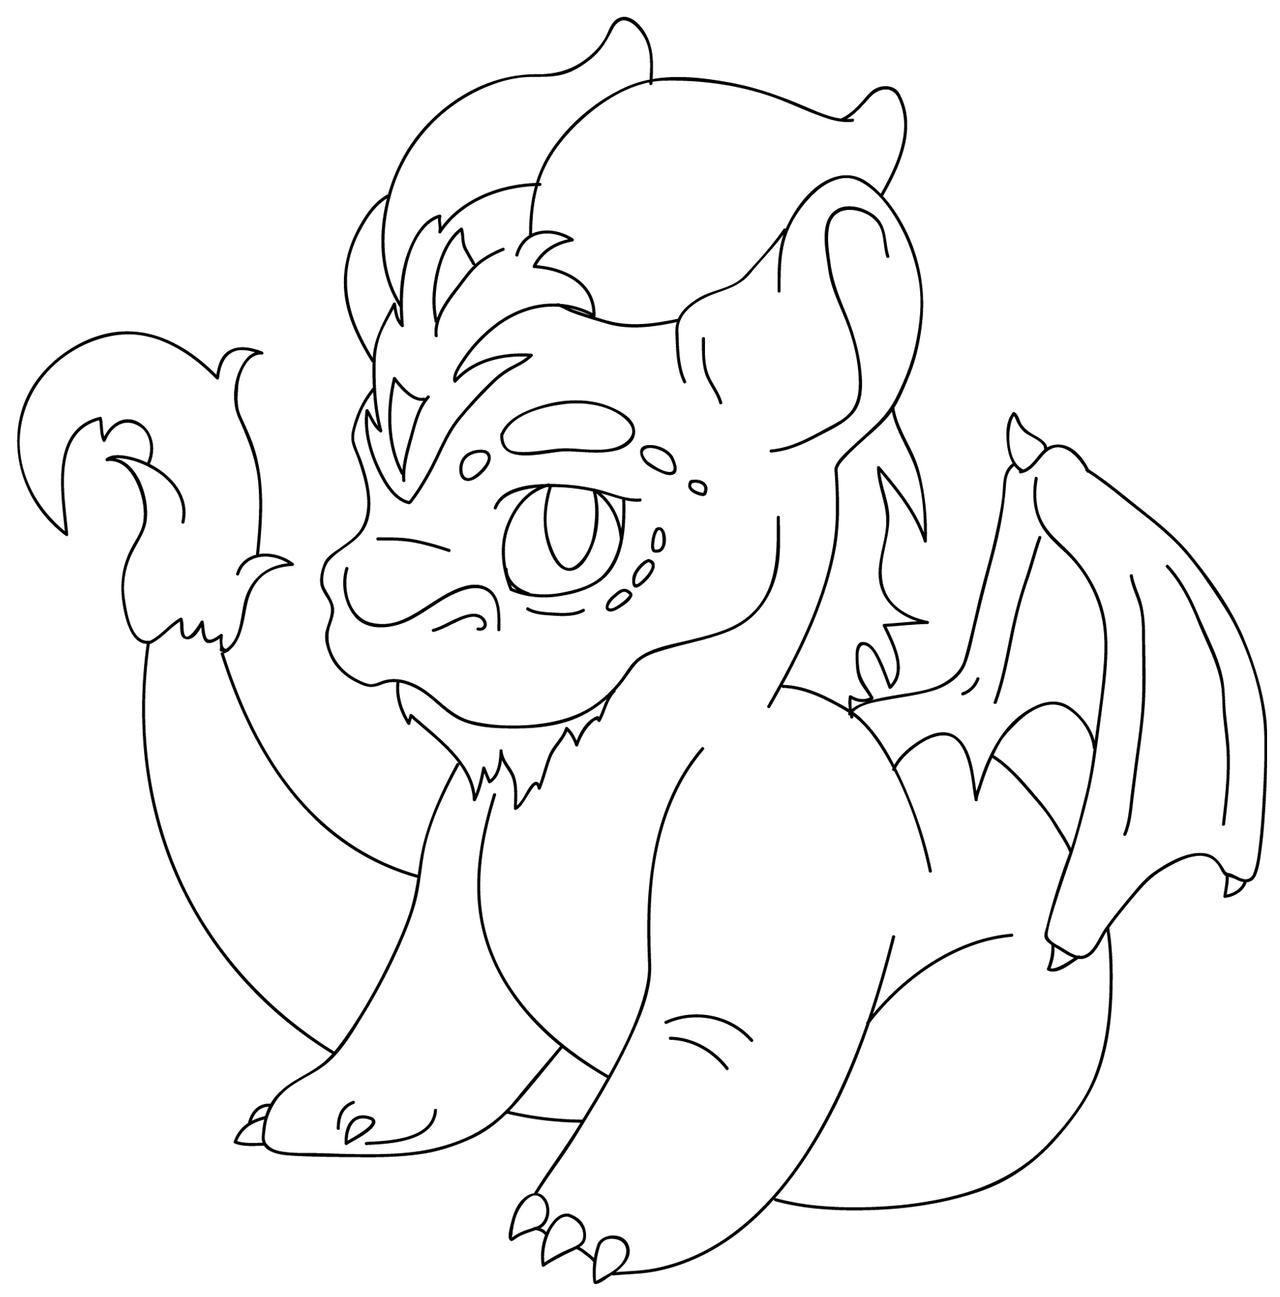 Cute Baby Dragon Coloring Pages
 Cute Dragon lineart by Phobic42 on DeviantArt